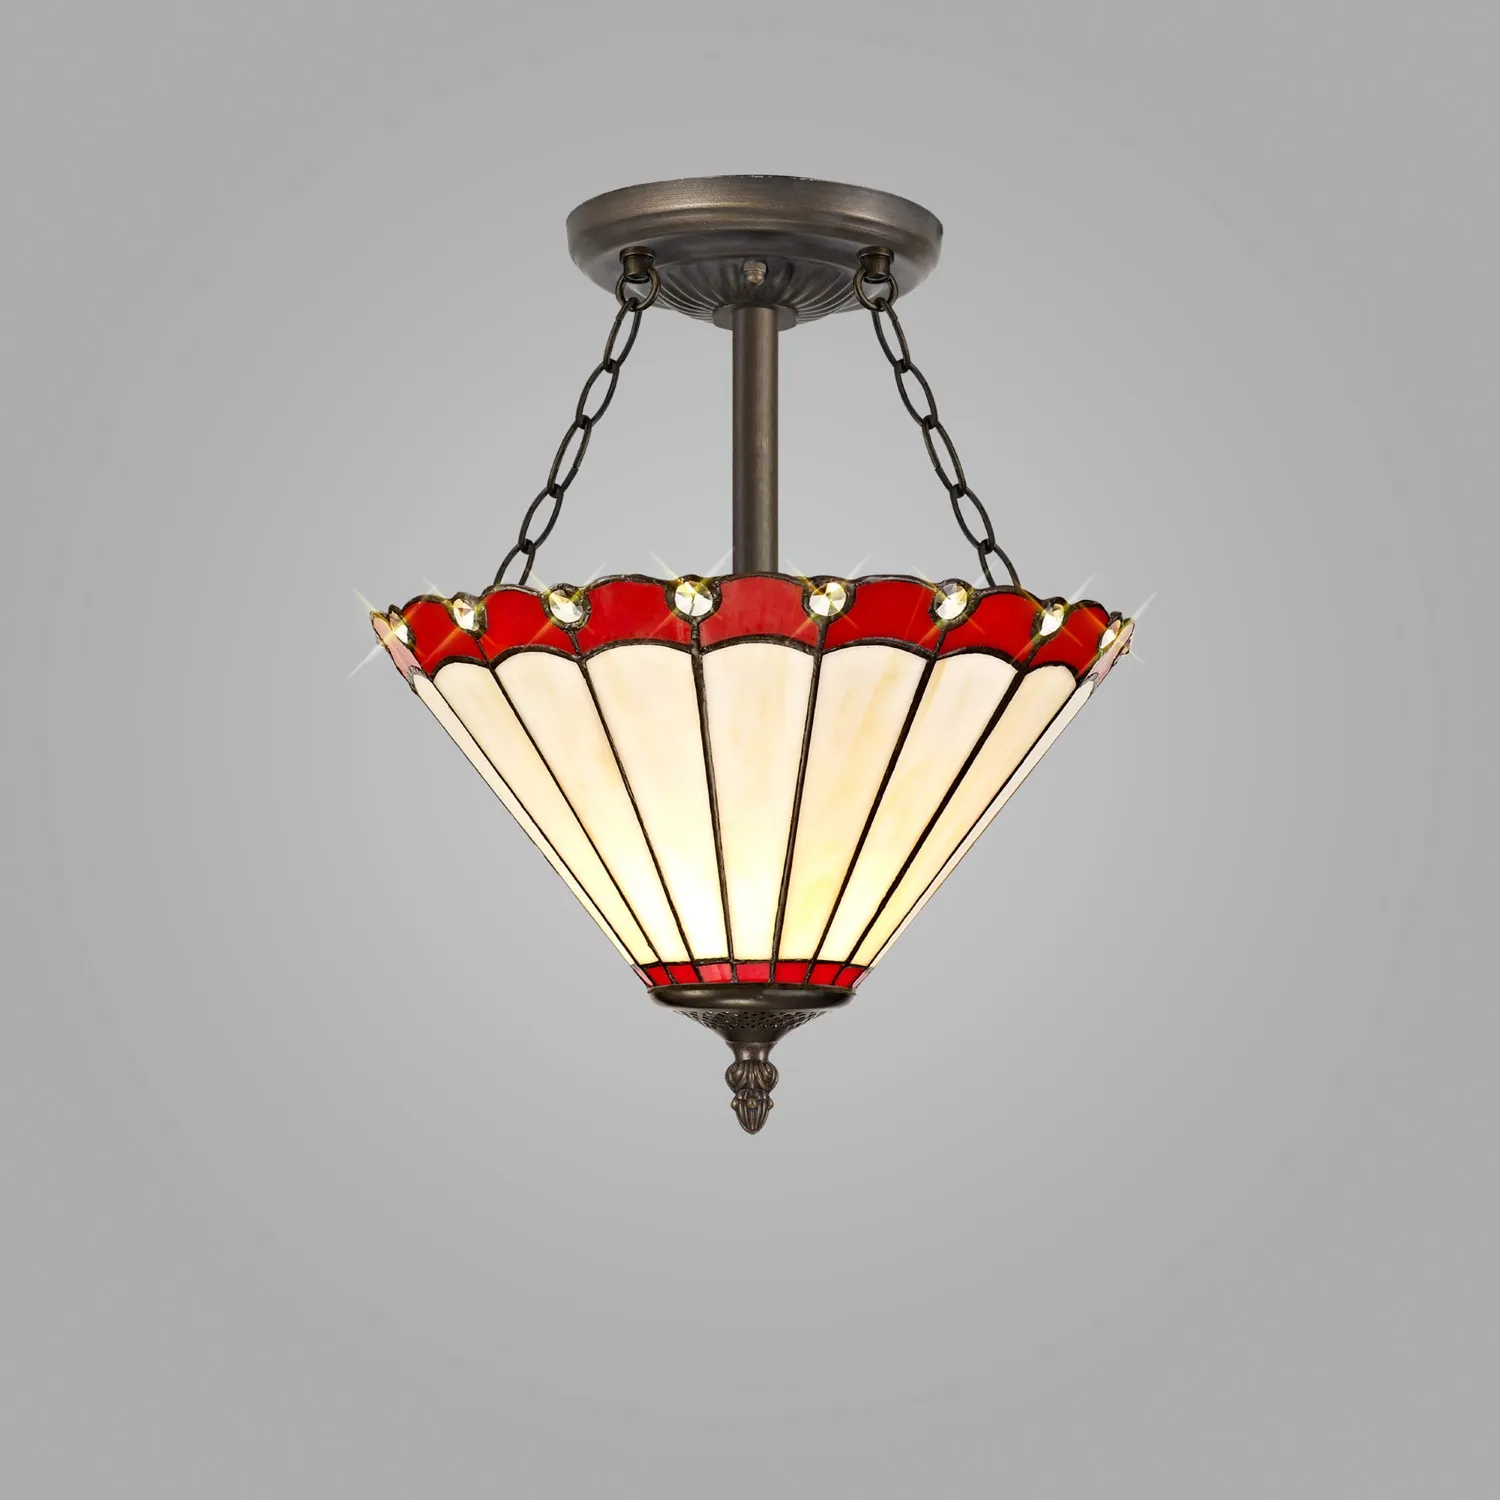 Ware 3 Light Semi Flush E27 With 30cm Tiffany Shade, Red Cream Crystal Aged Antique Brass